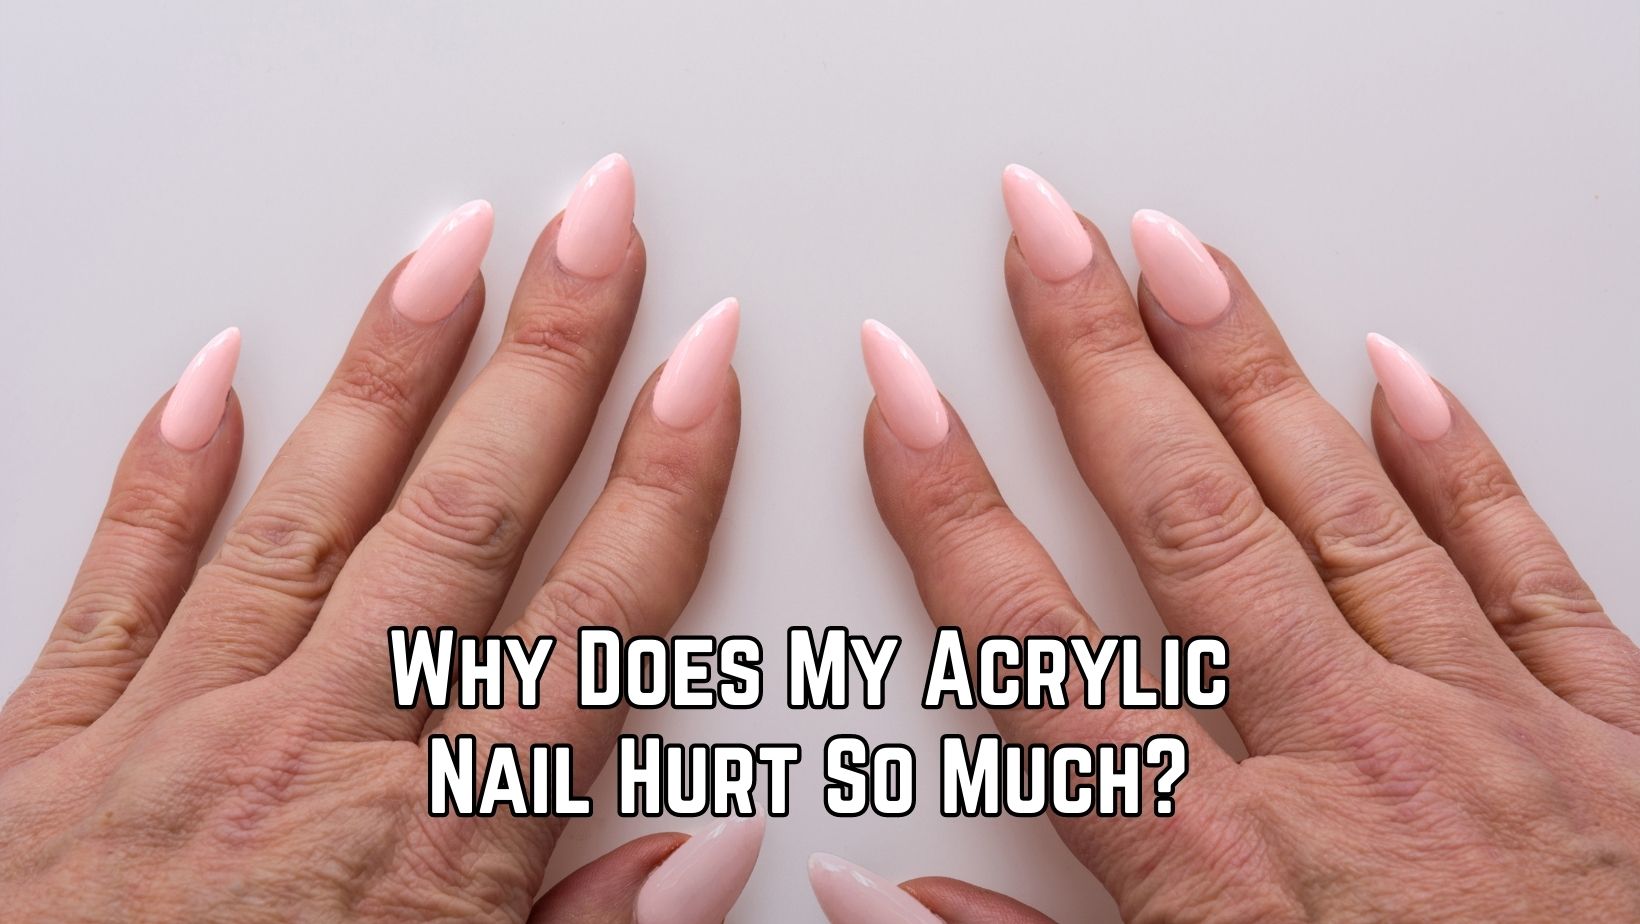 Why Does My Acrylic Nail Hurt So Much